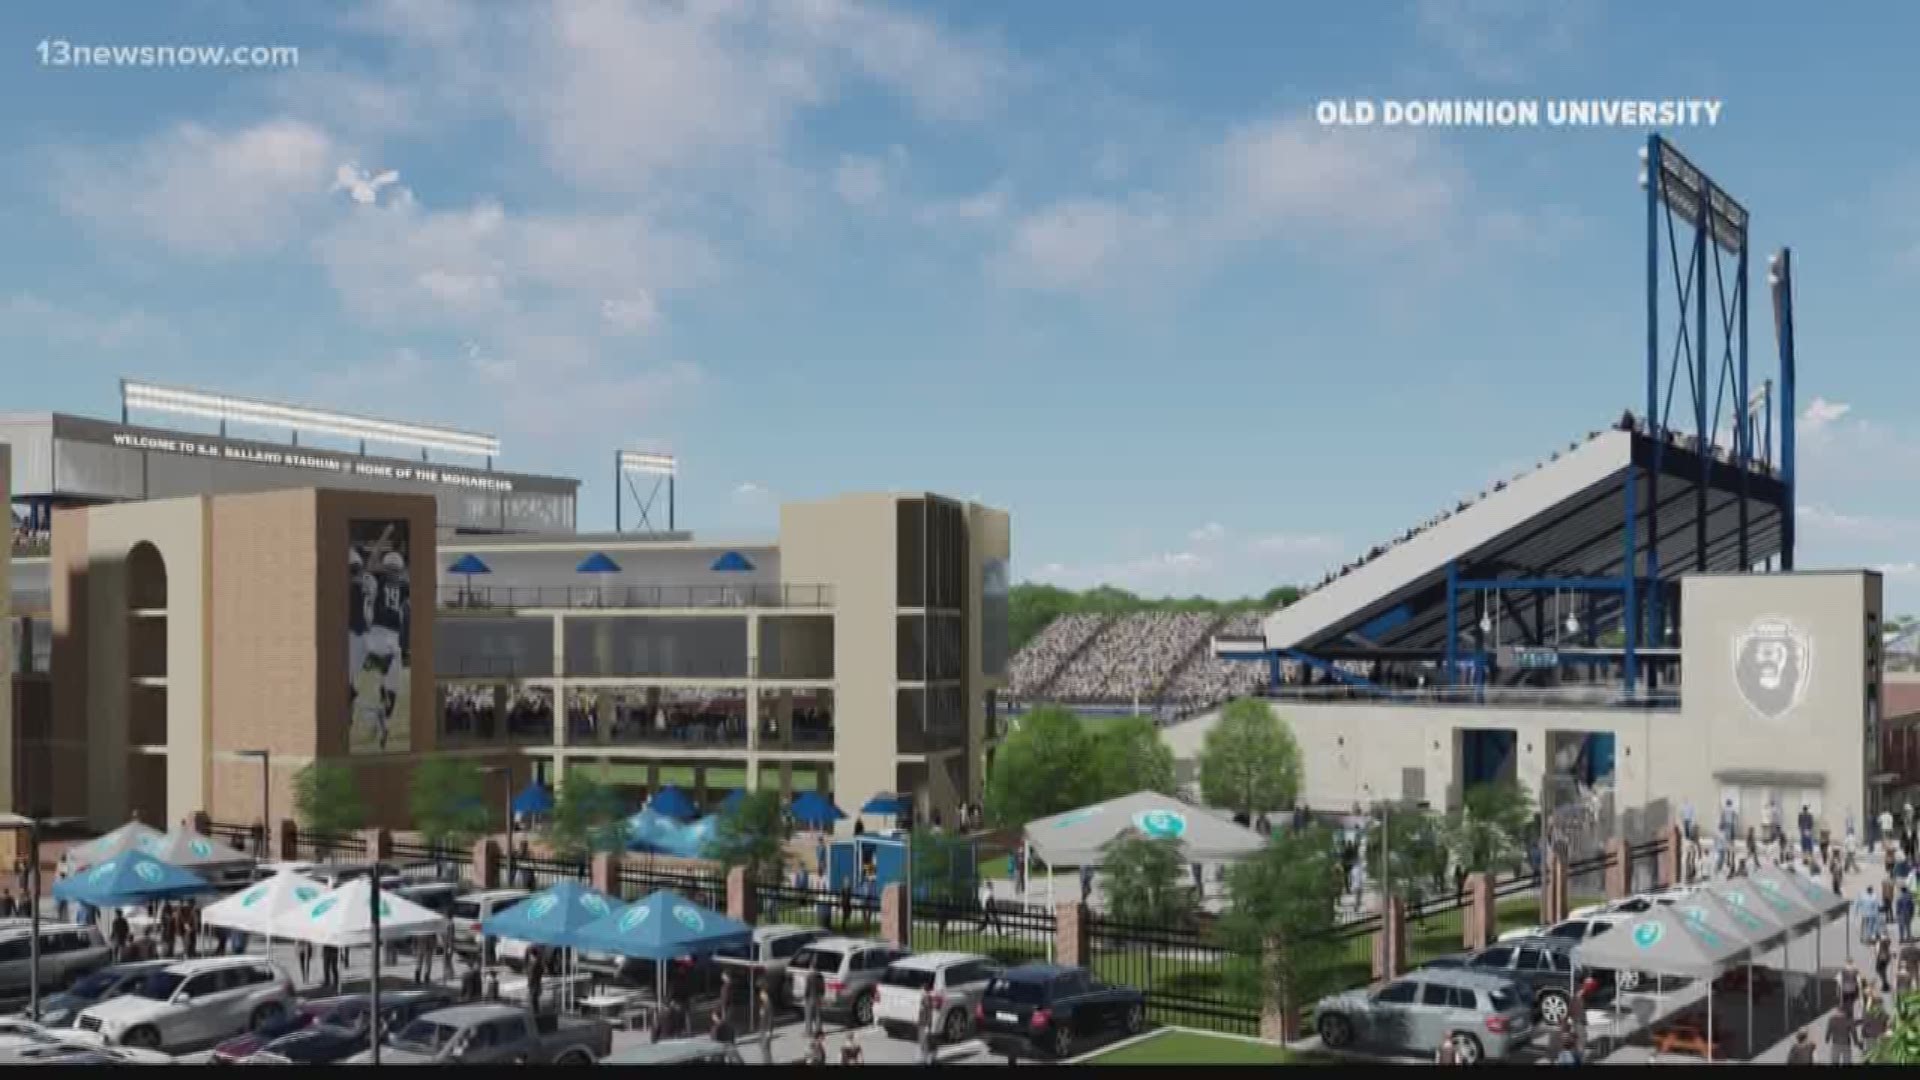 There are new plans to upgrade SB Ballard Stadium at ODU